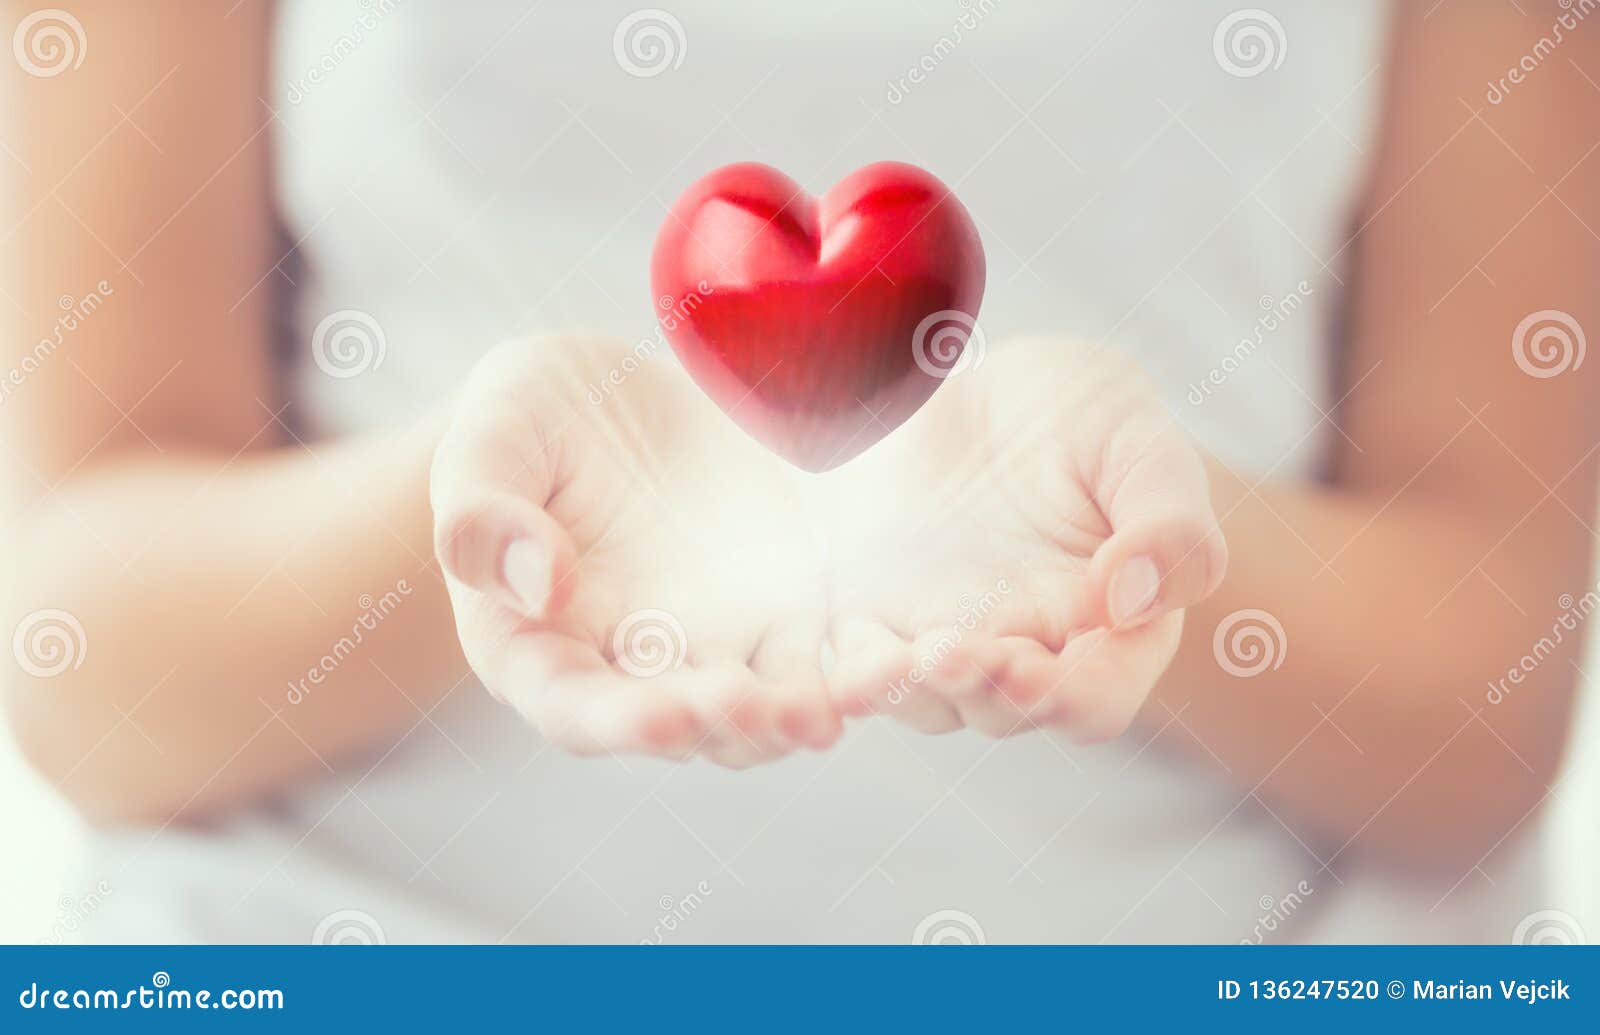 gentle womens hands and a red heart glowing in his hands. valentines mothers day and charity concept